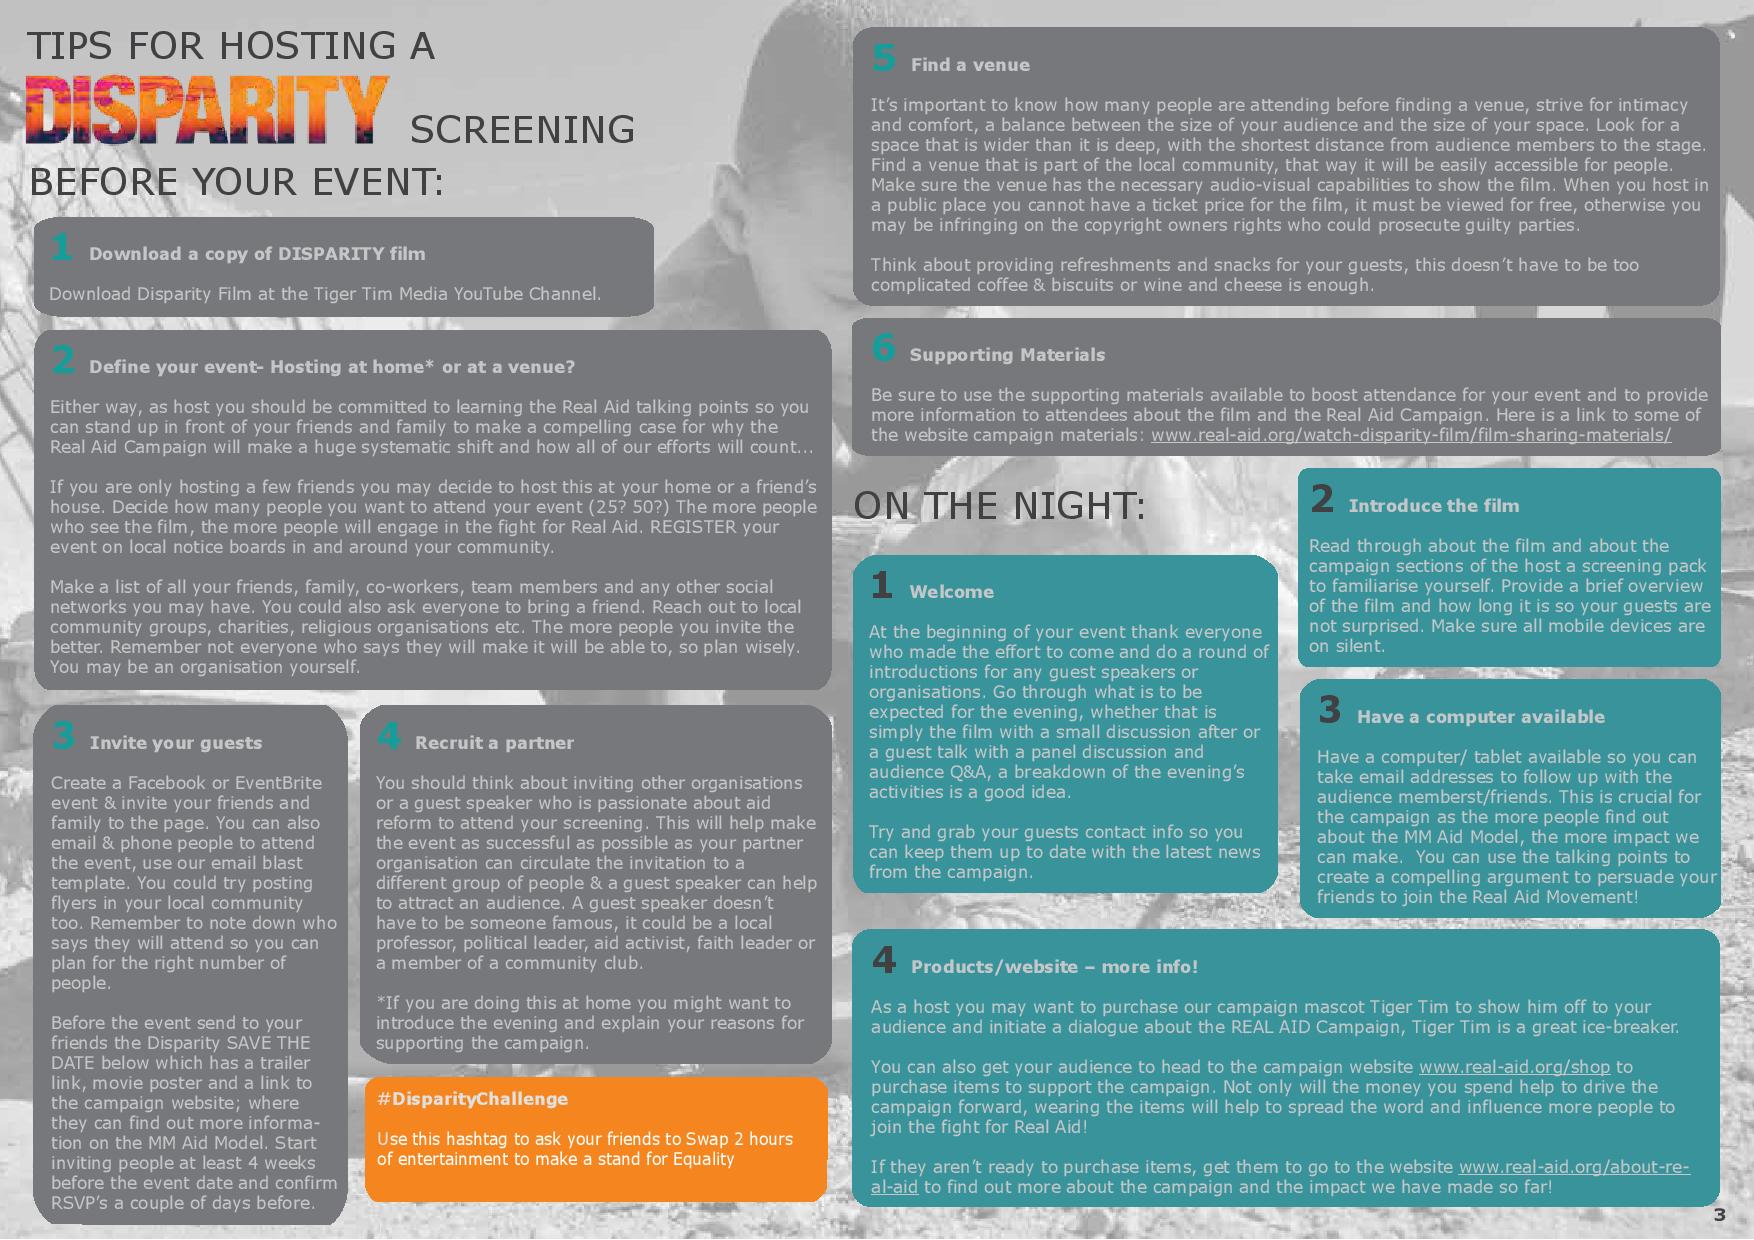 Host a Disparity screening, tips for hosting